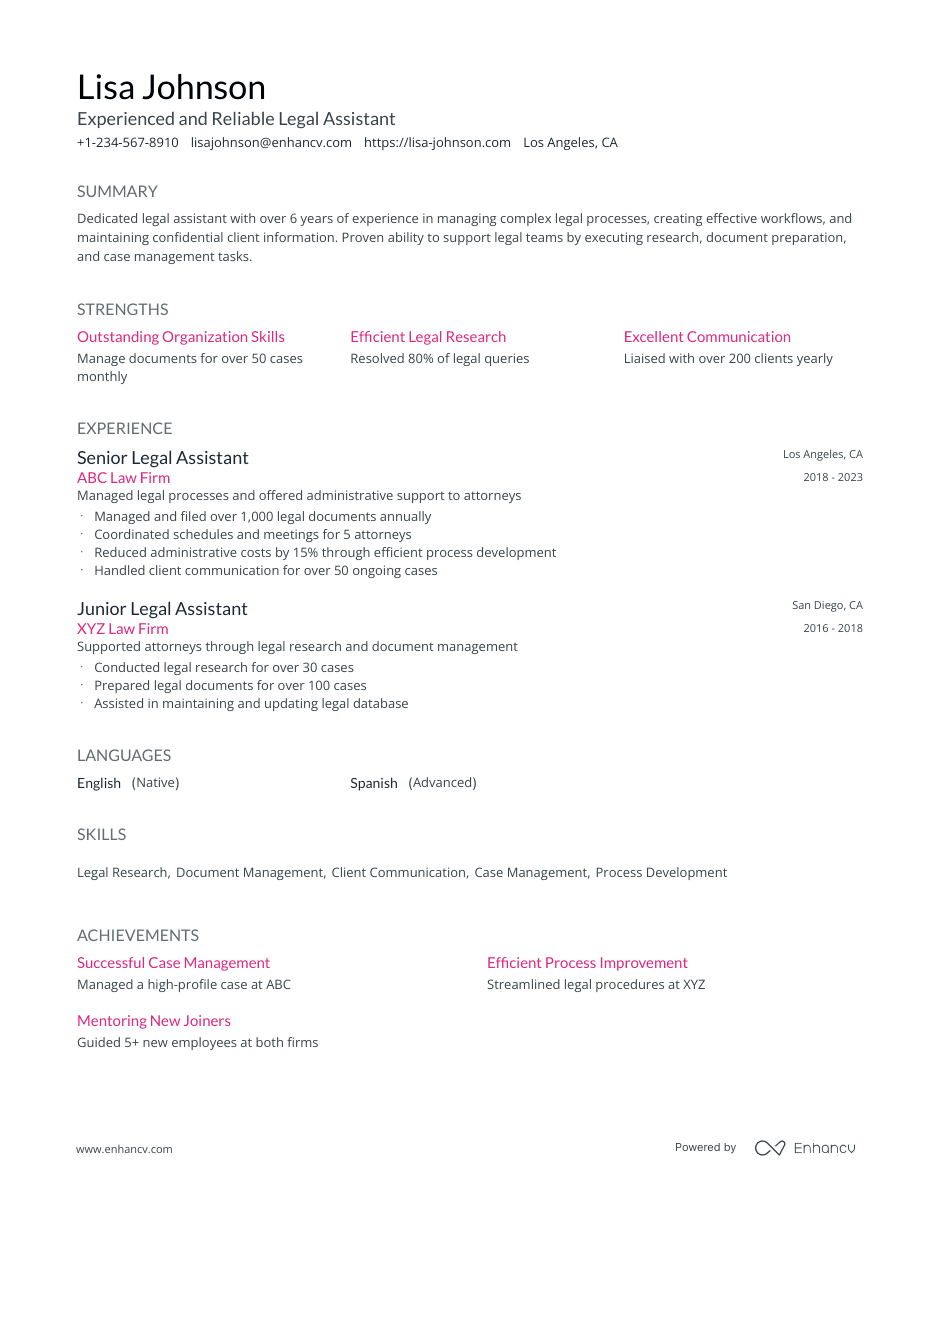 Experienced and Reliable Legal Assistant resume example